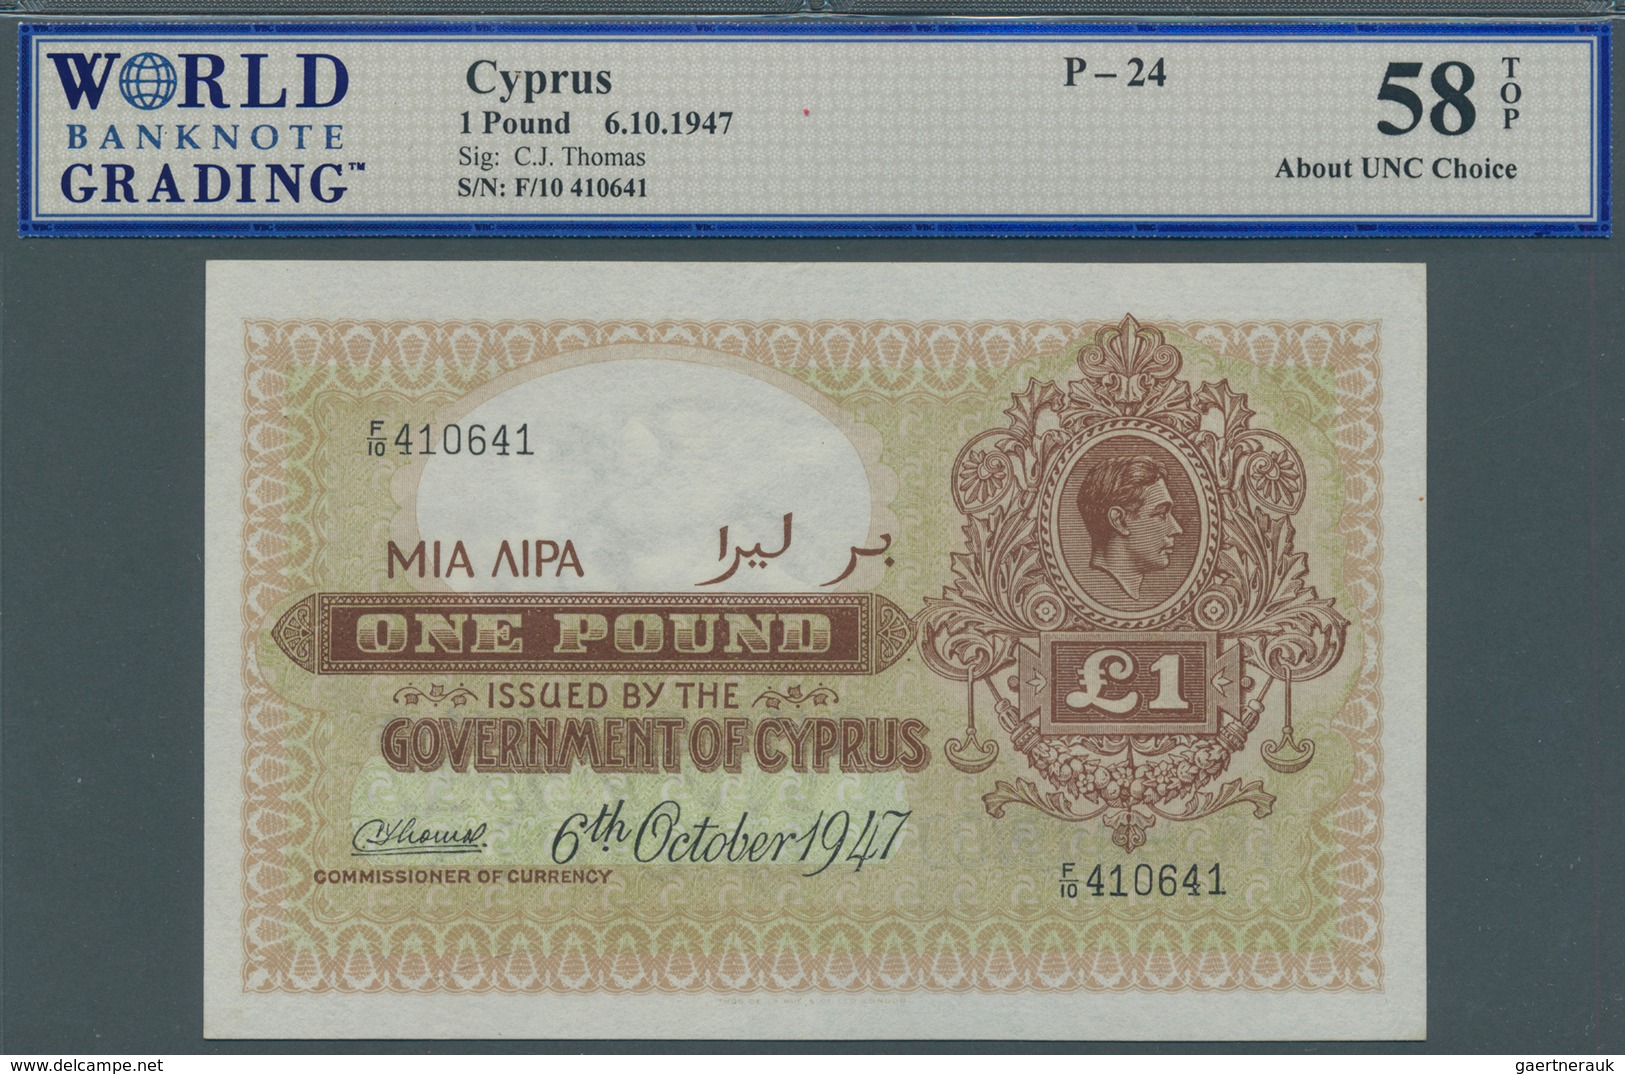 01339 Cyprus / Zypern: 1 Pound 1947, P.24, Minor Spots At Right Border, WBG Grading 58 About UNC Choice TO - Chipre